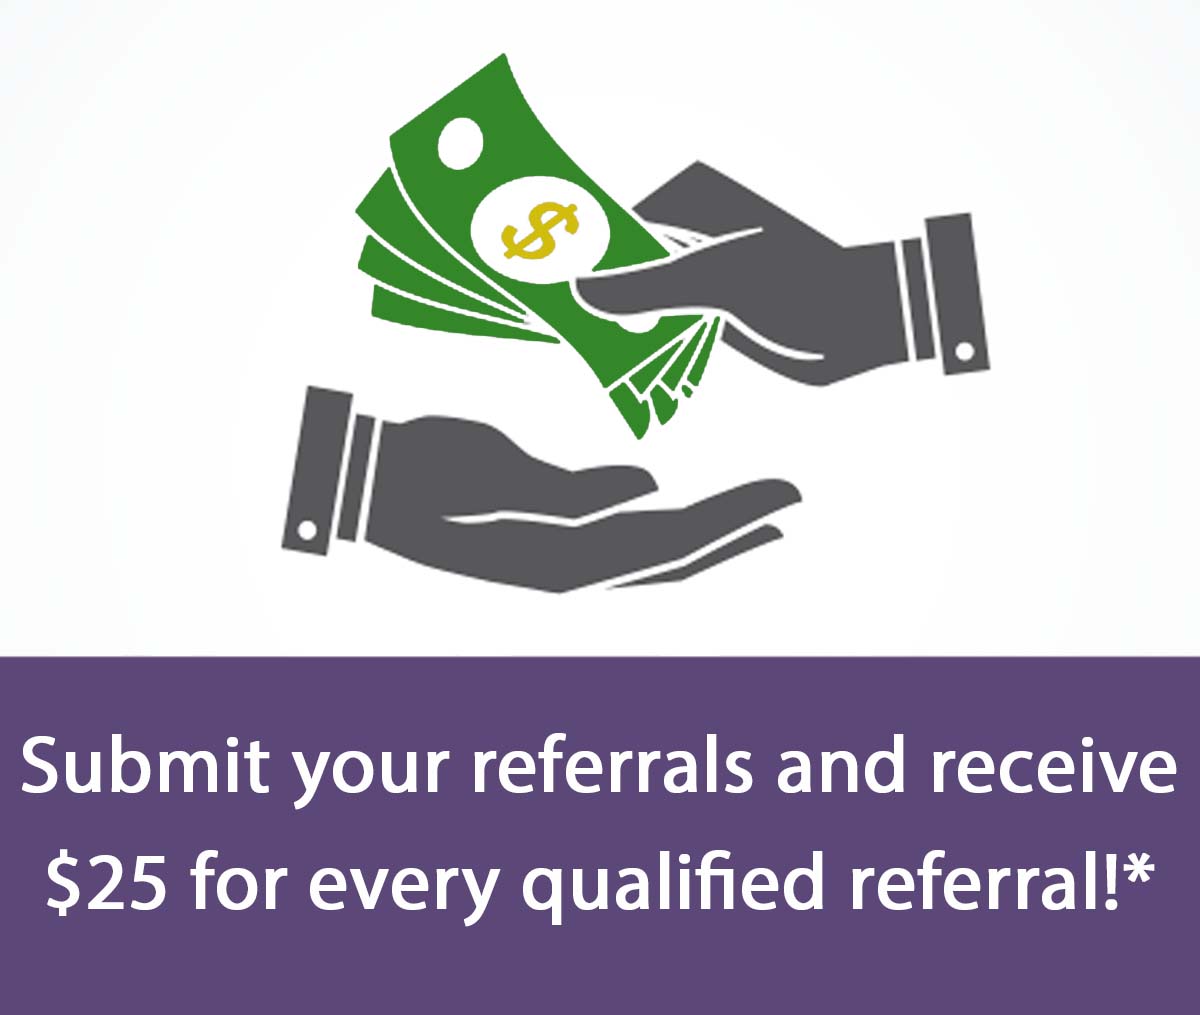 Submit your referrals and receive $25 for every qualified referral